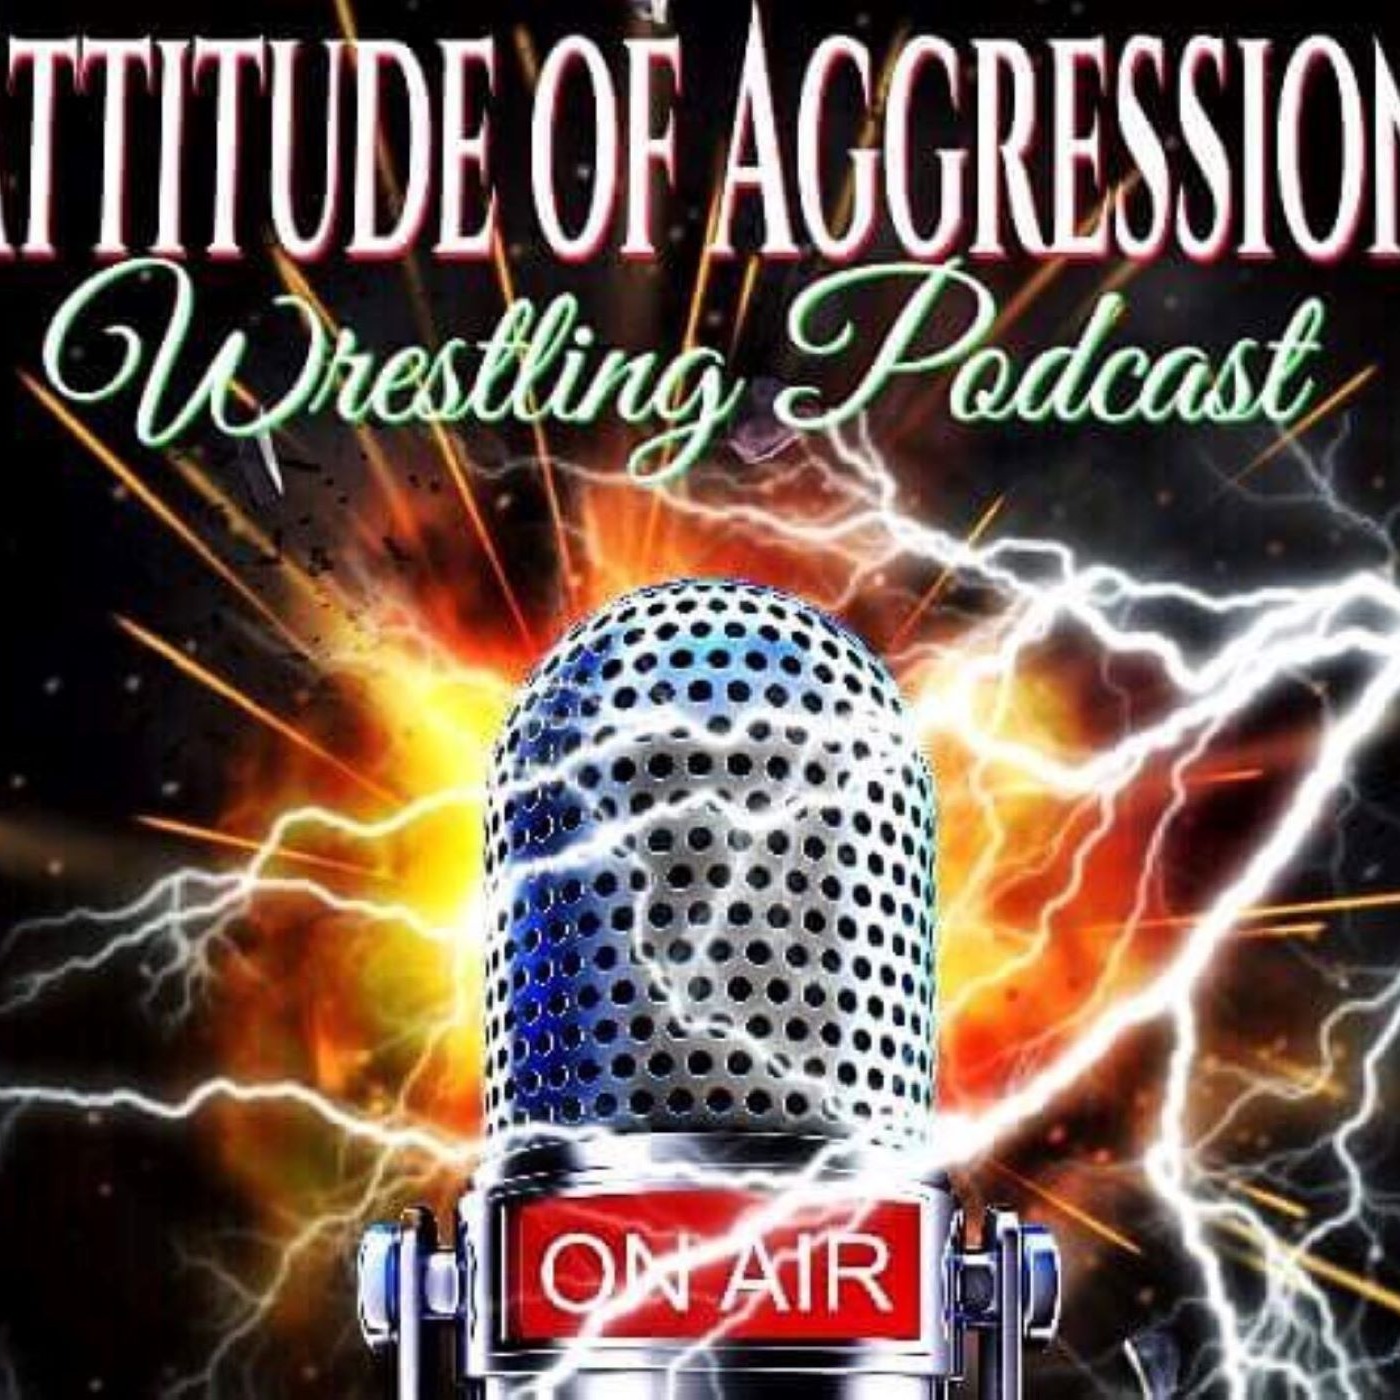 Attitude Of Aggression #283- 9th Annual Swaggy Awards Part 1